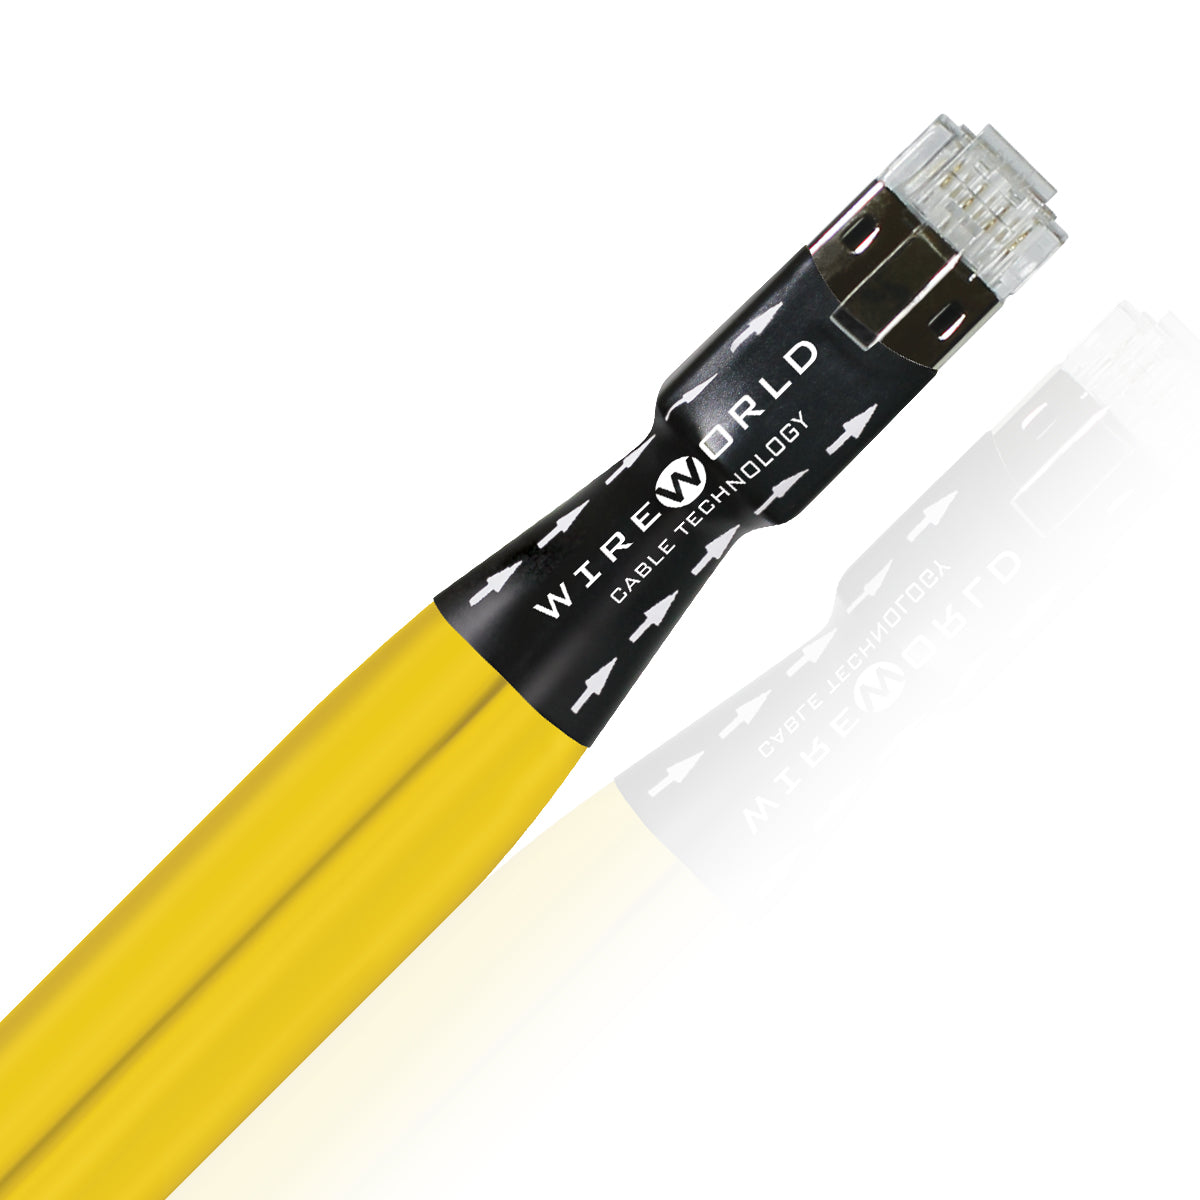 CN Rood 8M-8M Ethernet Cable